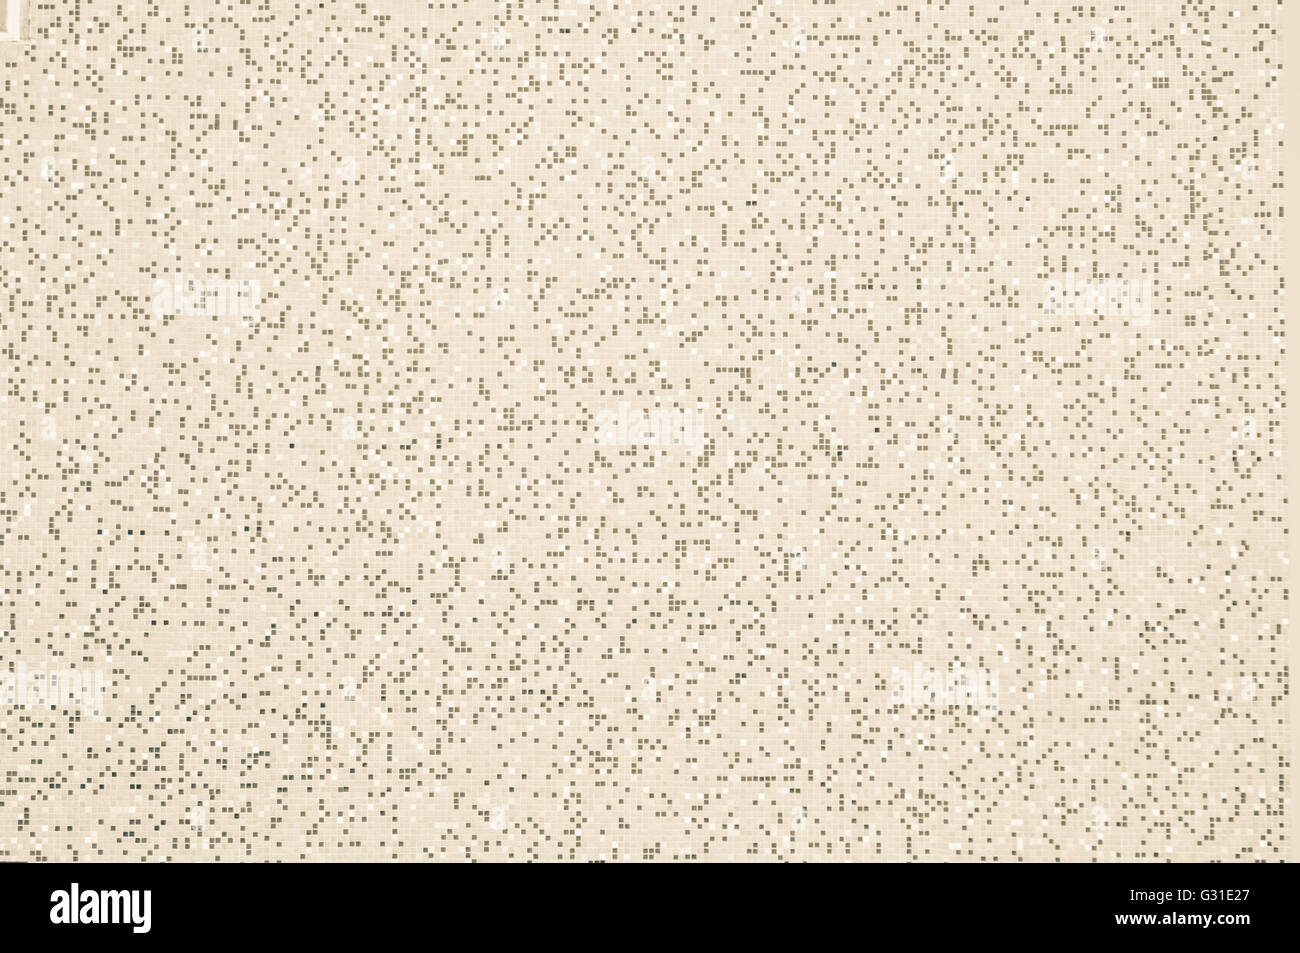 Square pixel mosaic background with light brownish tones, copy space Stock Photo